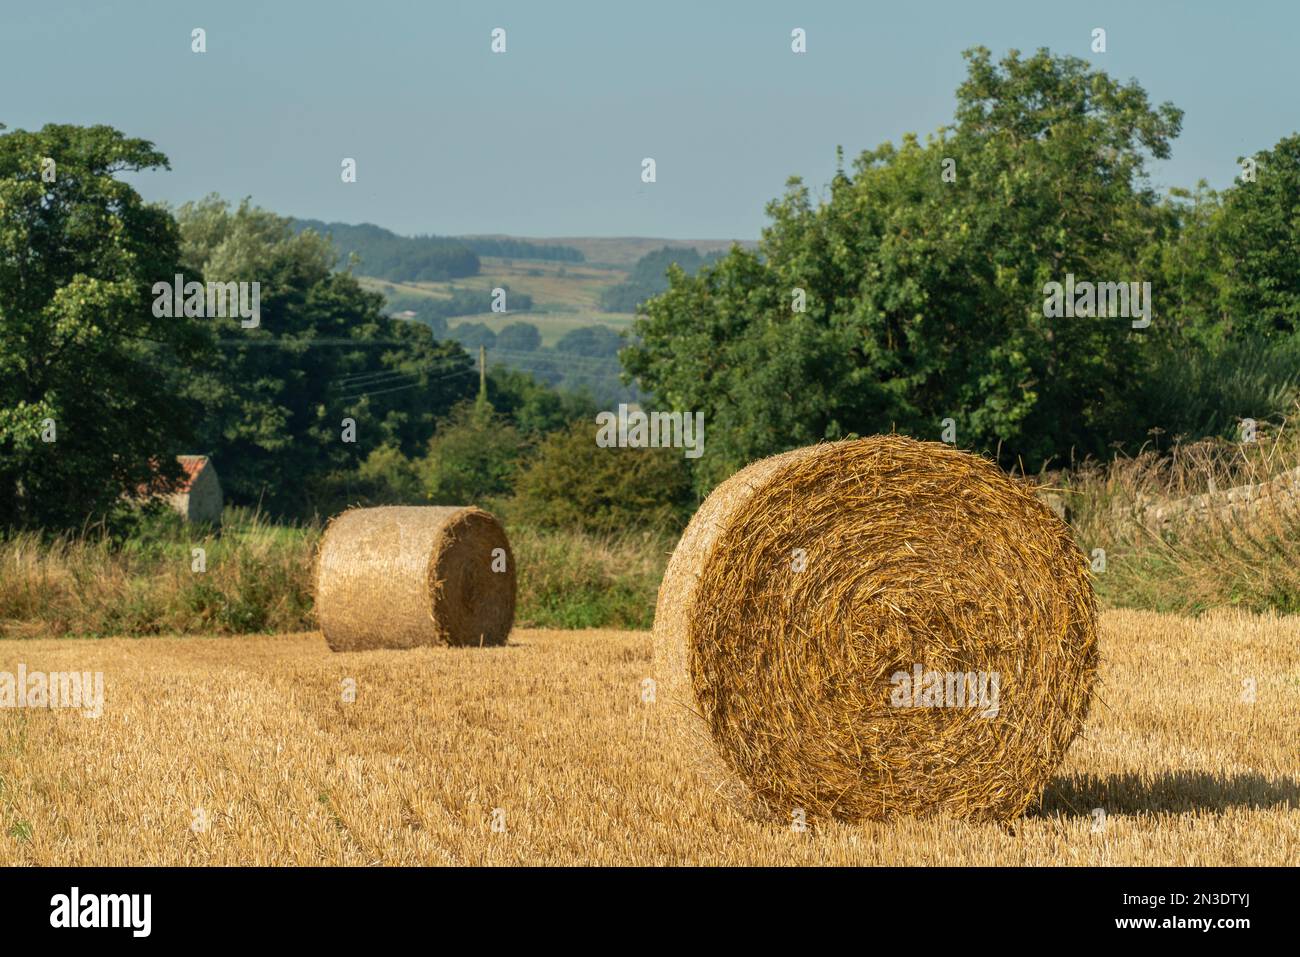 Close-up of large hay rolls in a field on a farm in Richmond; Richmond, Richmondshire, England Stock Photo